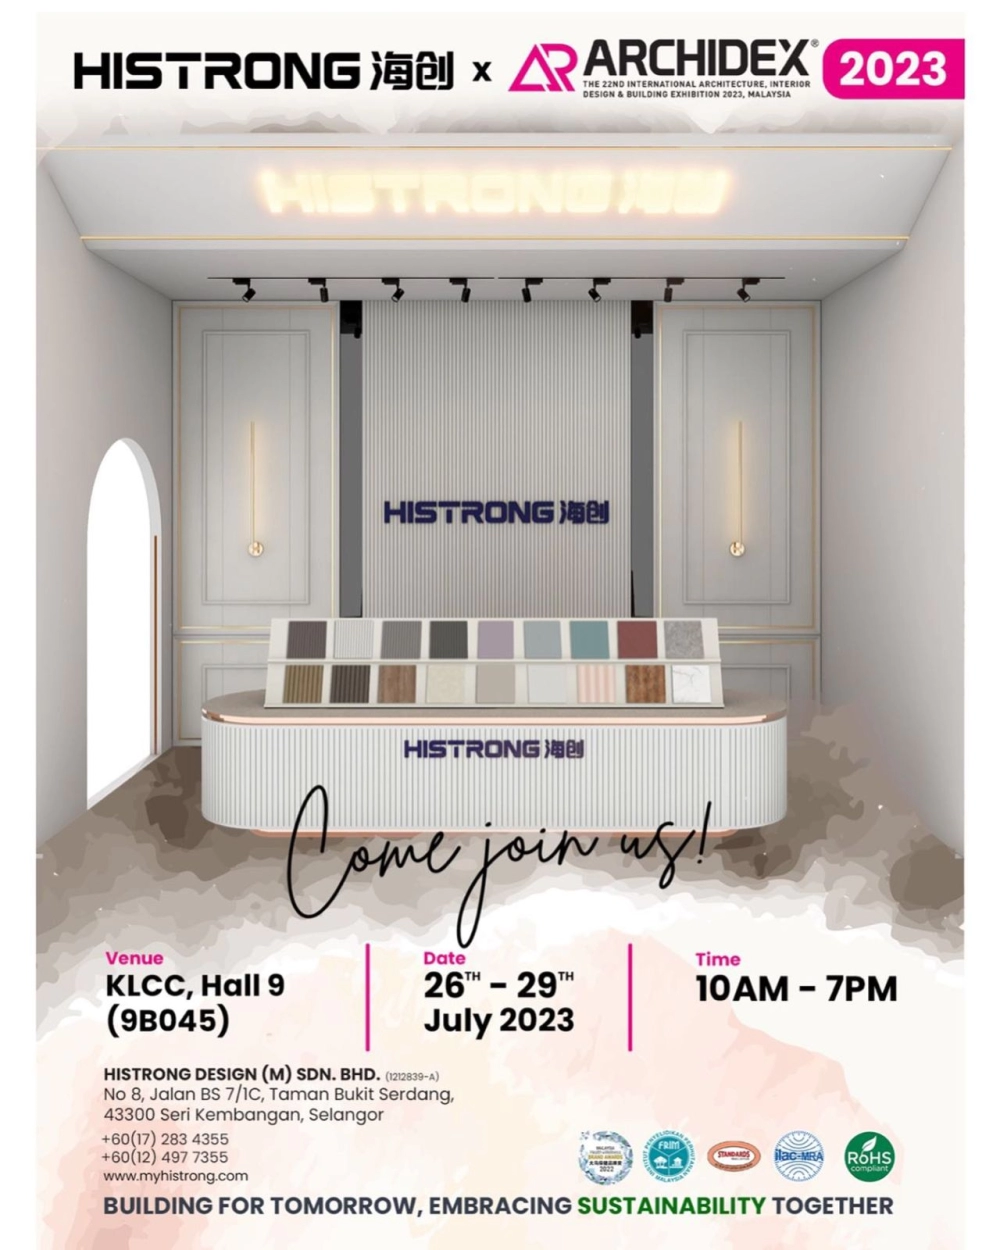 HISTRONG x Archidex 2023: 26th - 29th July 2023 | 10am - 7pm 